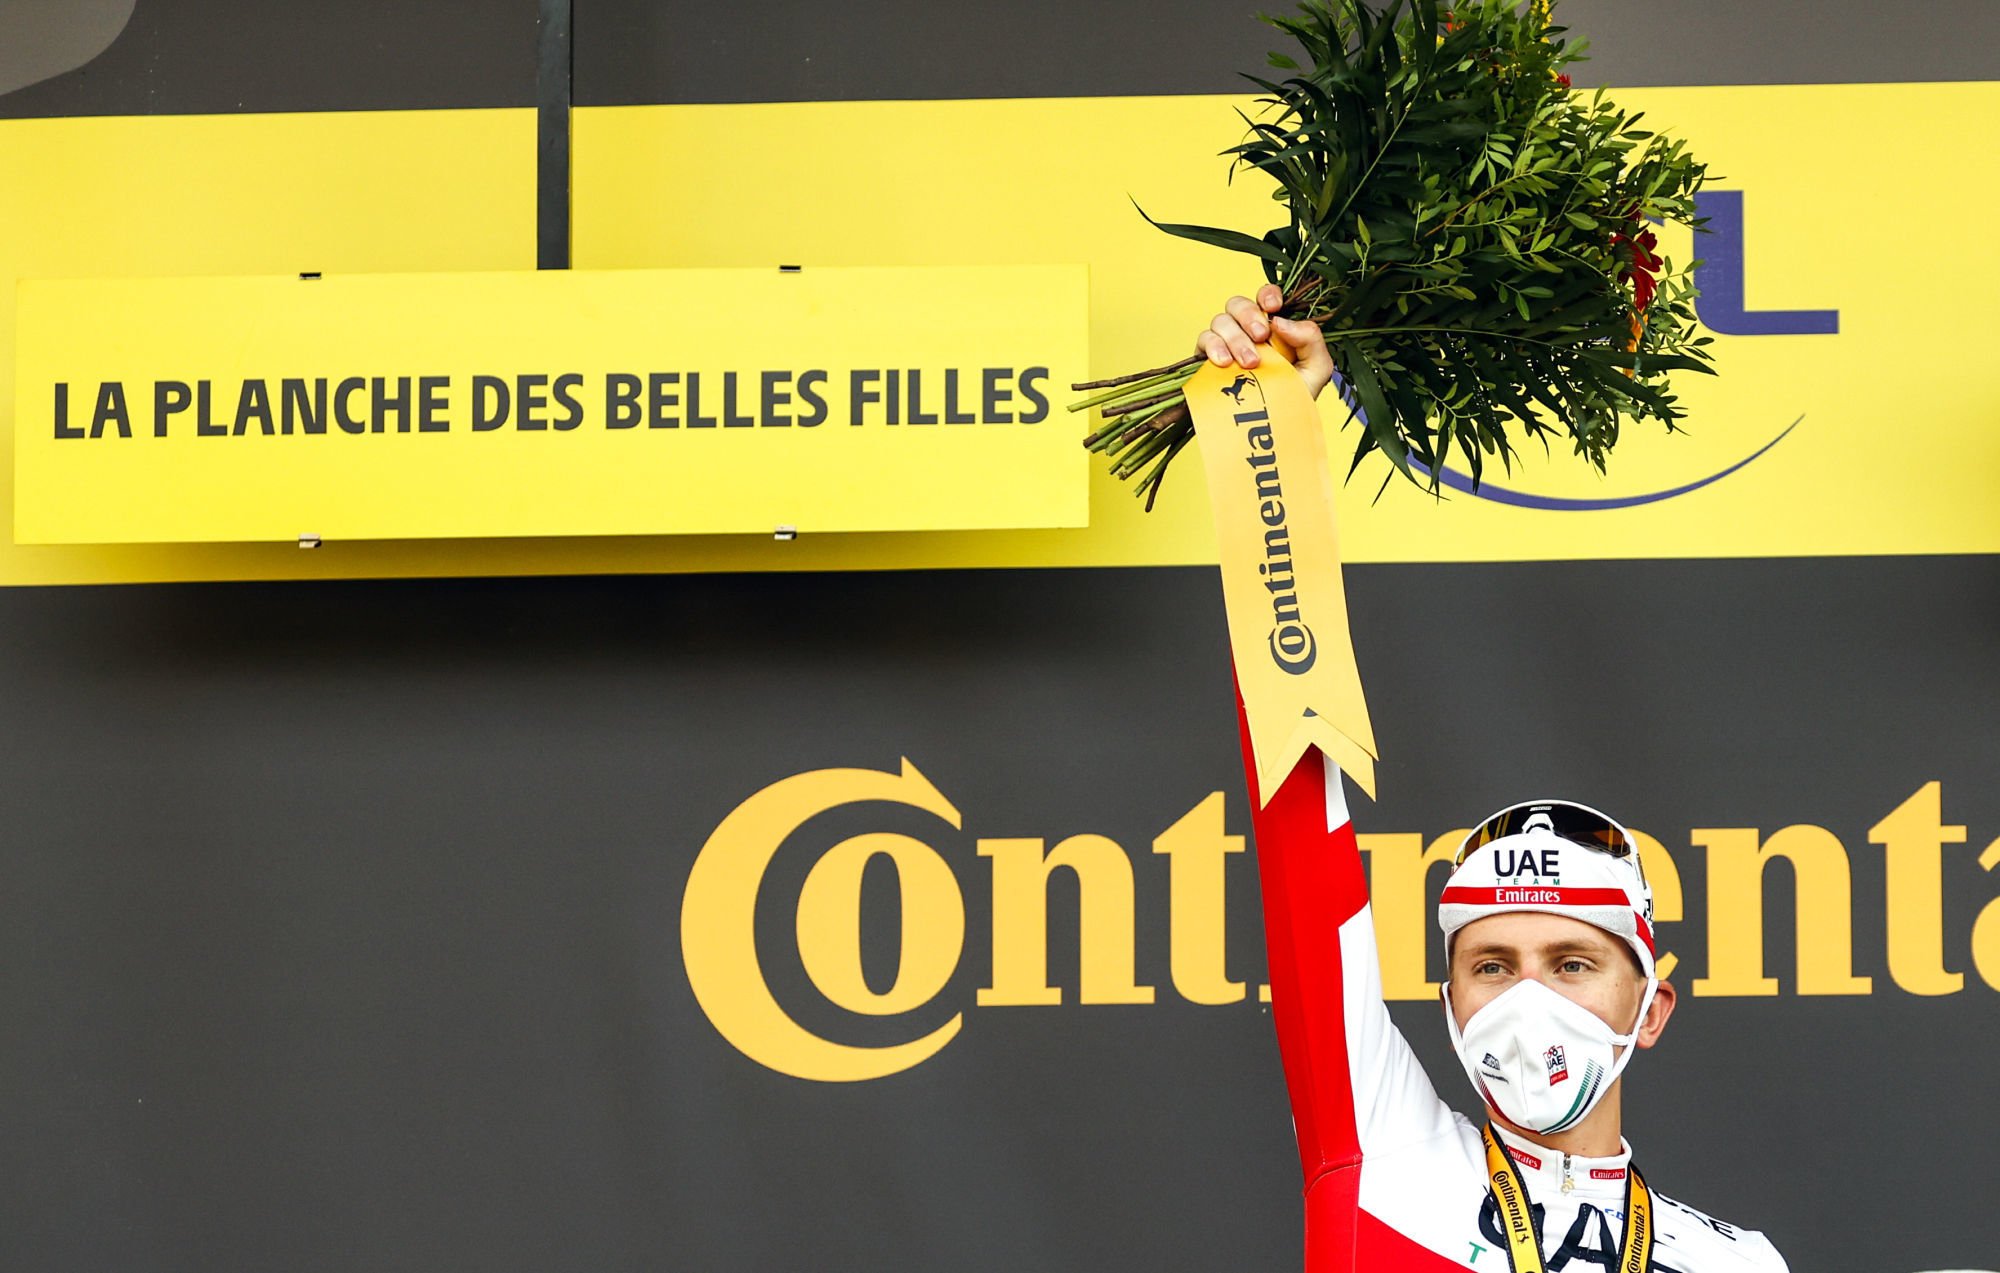 Tadej Pogacar of UAE Team Emirates celebrates on the podium after winning stage 20 of the 107th edition of the Tour de France cycling race, a 36,2km individual time trial from Lure to La Planche des Belles Filles, in France, Saturday 19 September 2020. This year's Tour de France was postponed due to the worldwide Covid-19 pandemic. The 2020 race starts in Nice on Saturday 29 August and ends on 20 September. BELGA PHOTO POOL 
Photo by Icon Sport